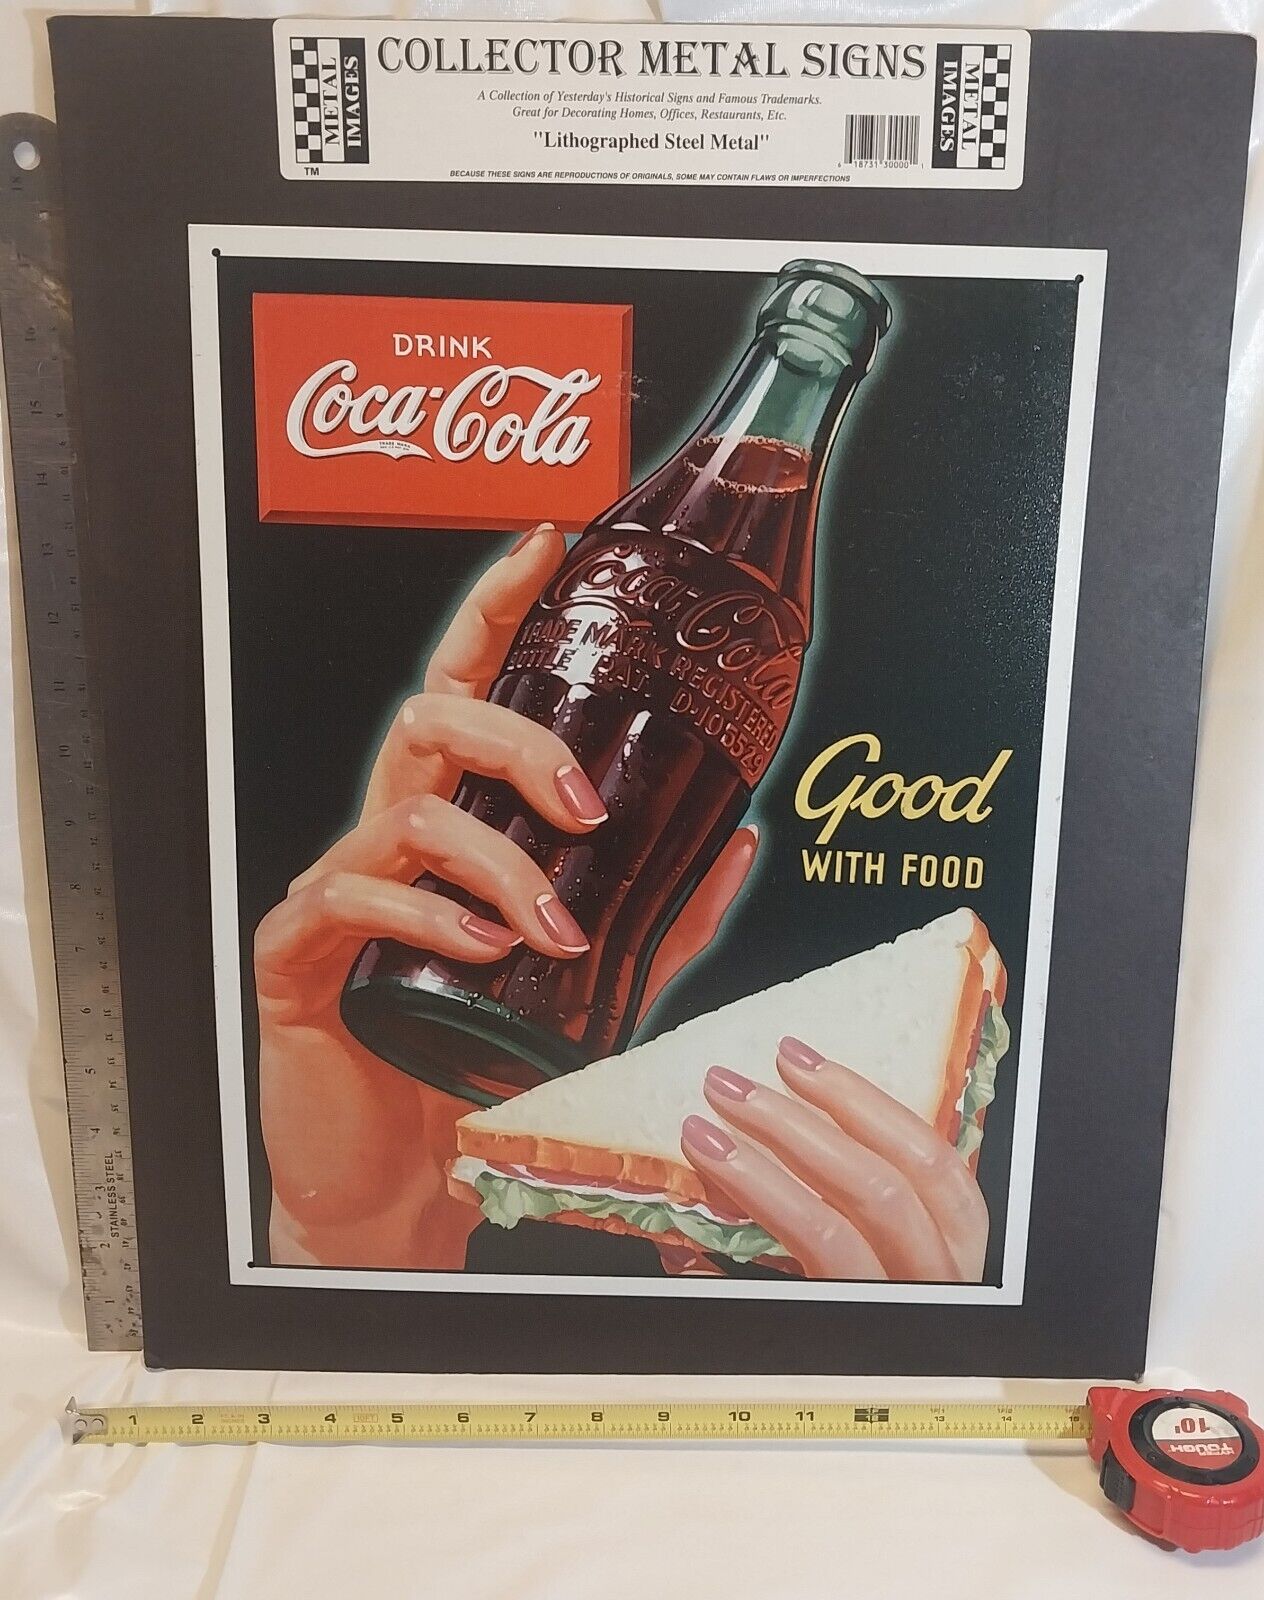 Collector Lithographed Steel Metal Signs Drink Coca-Cola Good With Food Coke 